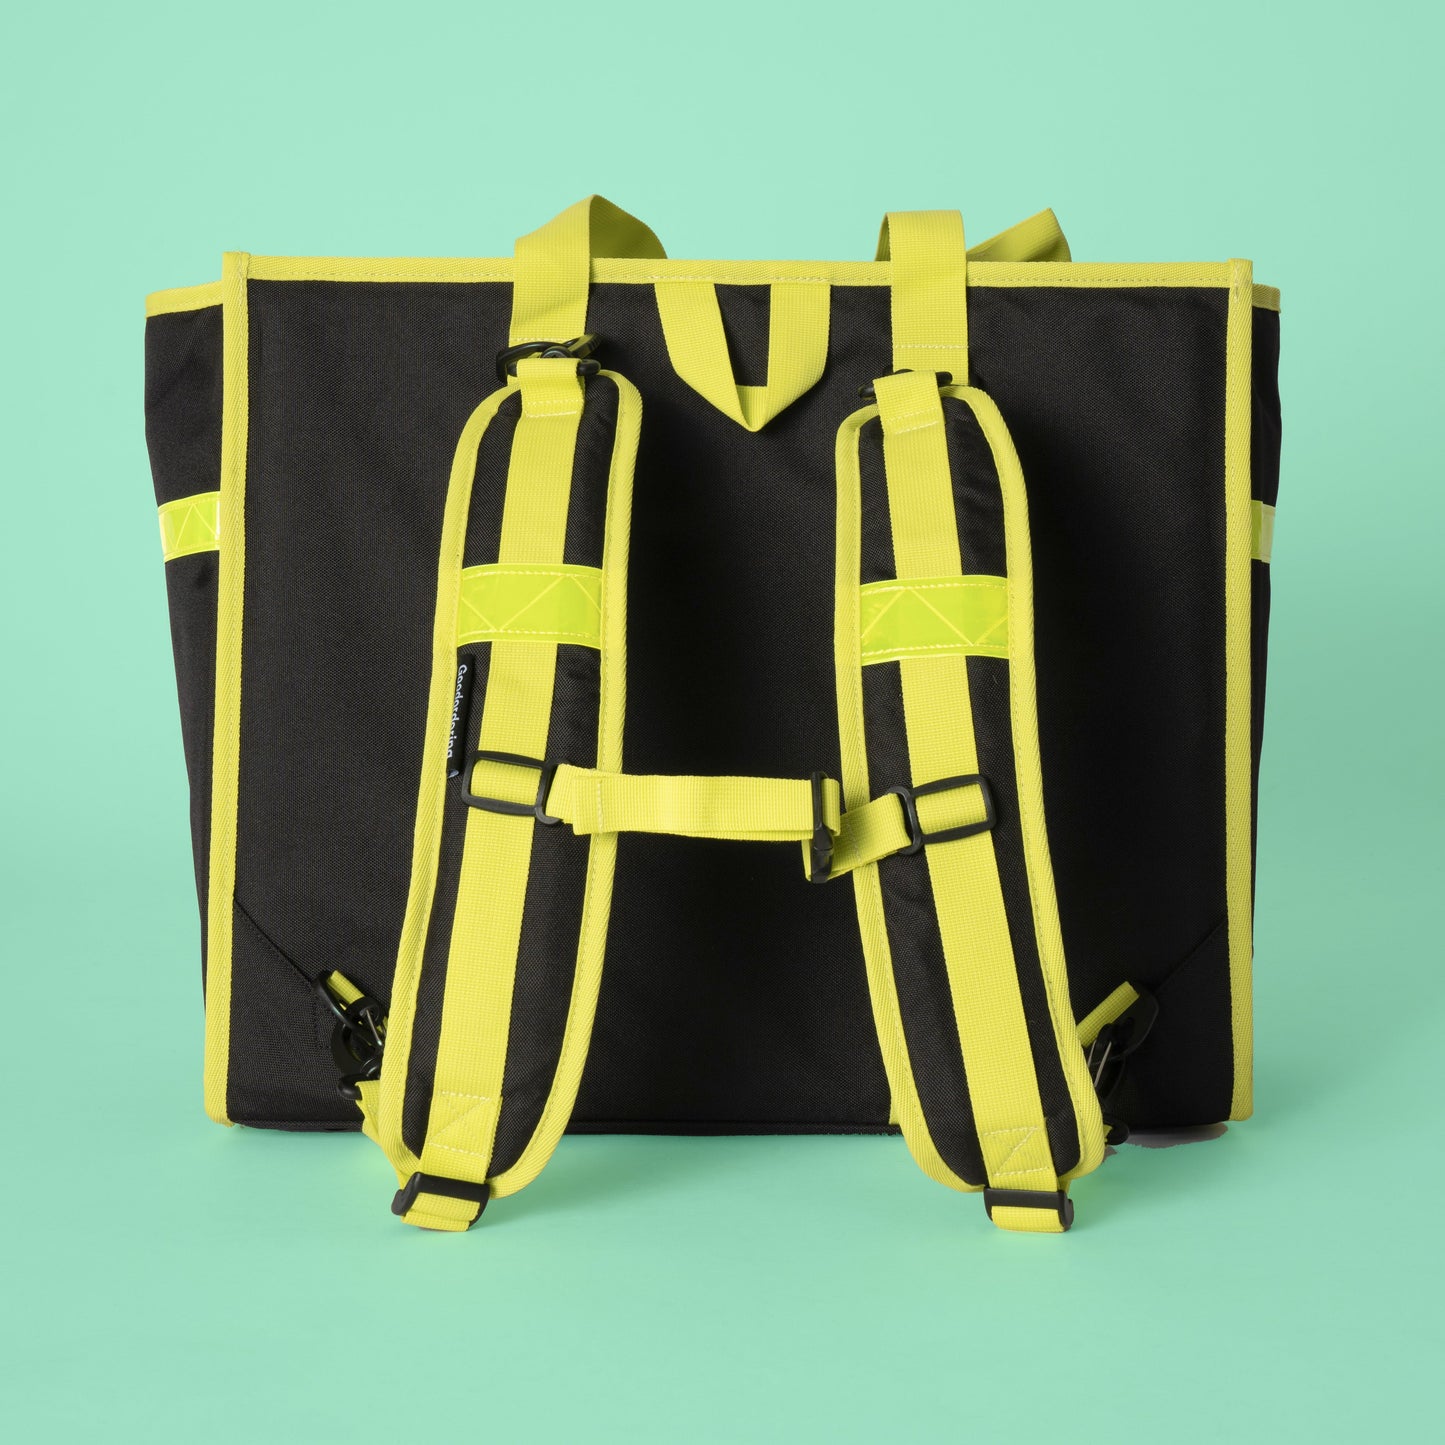 Neon tote backpack pannier with Kompakt rail hardware